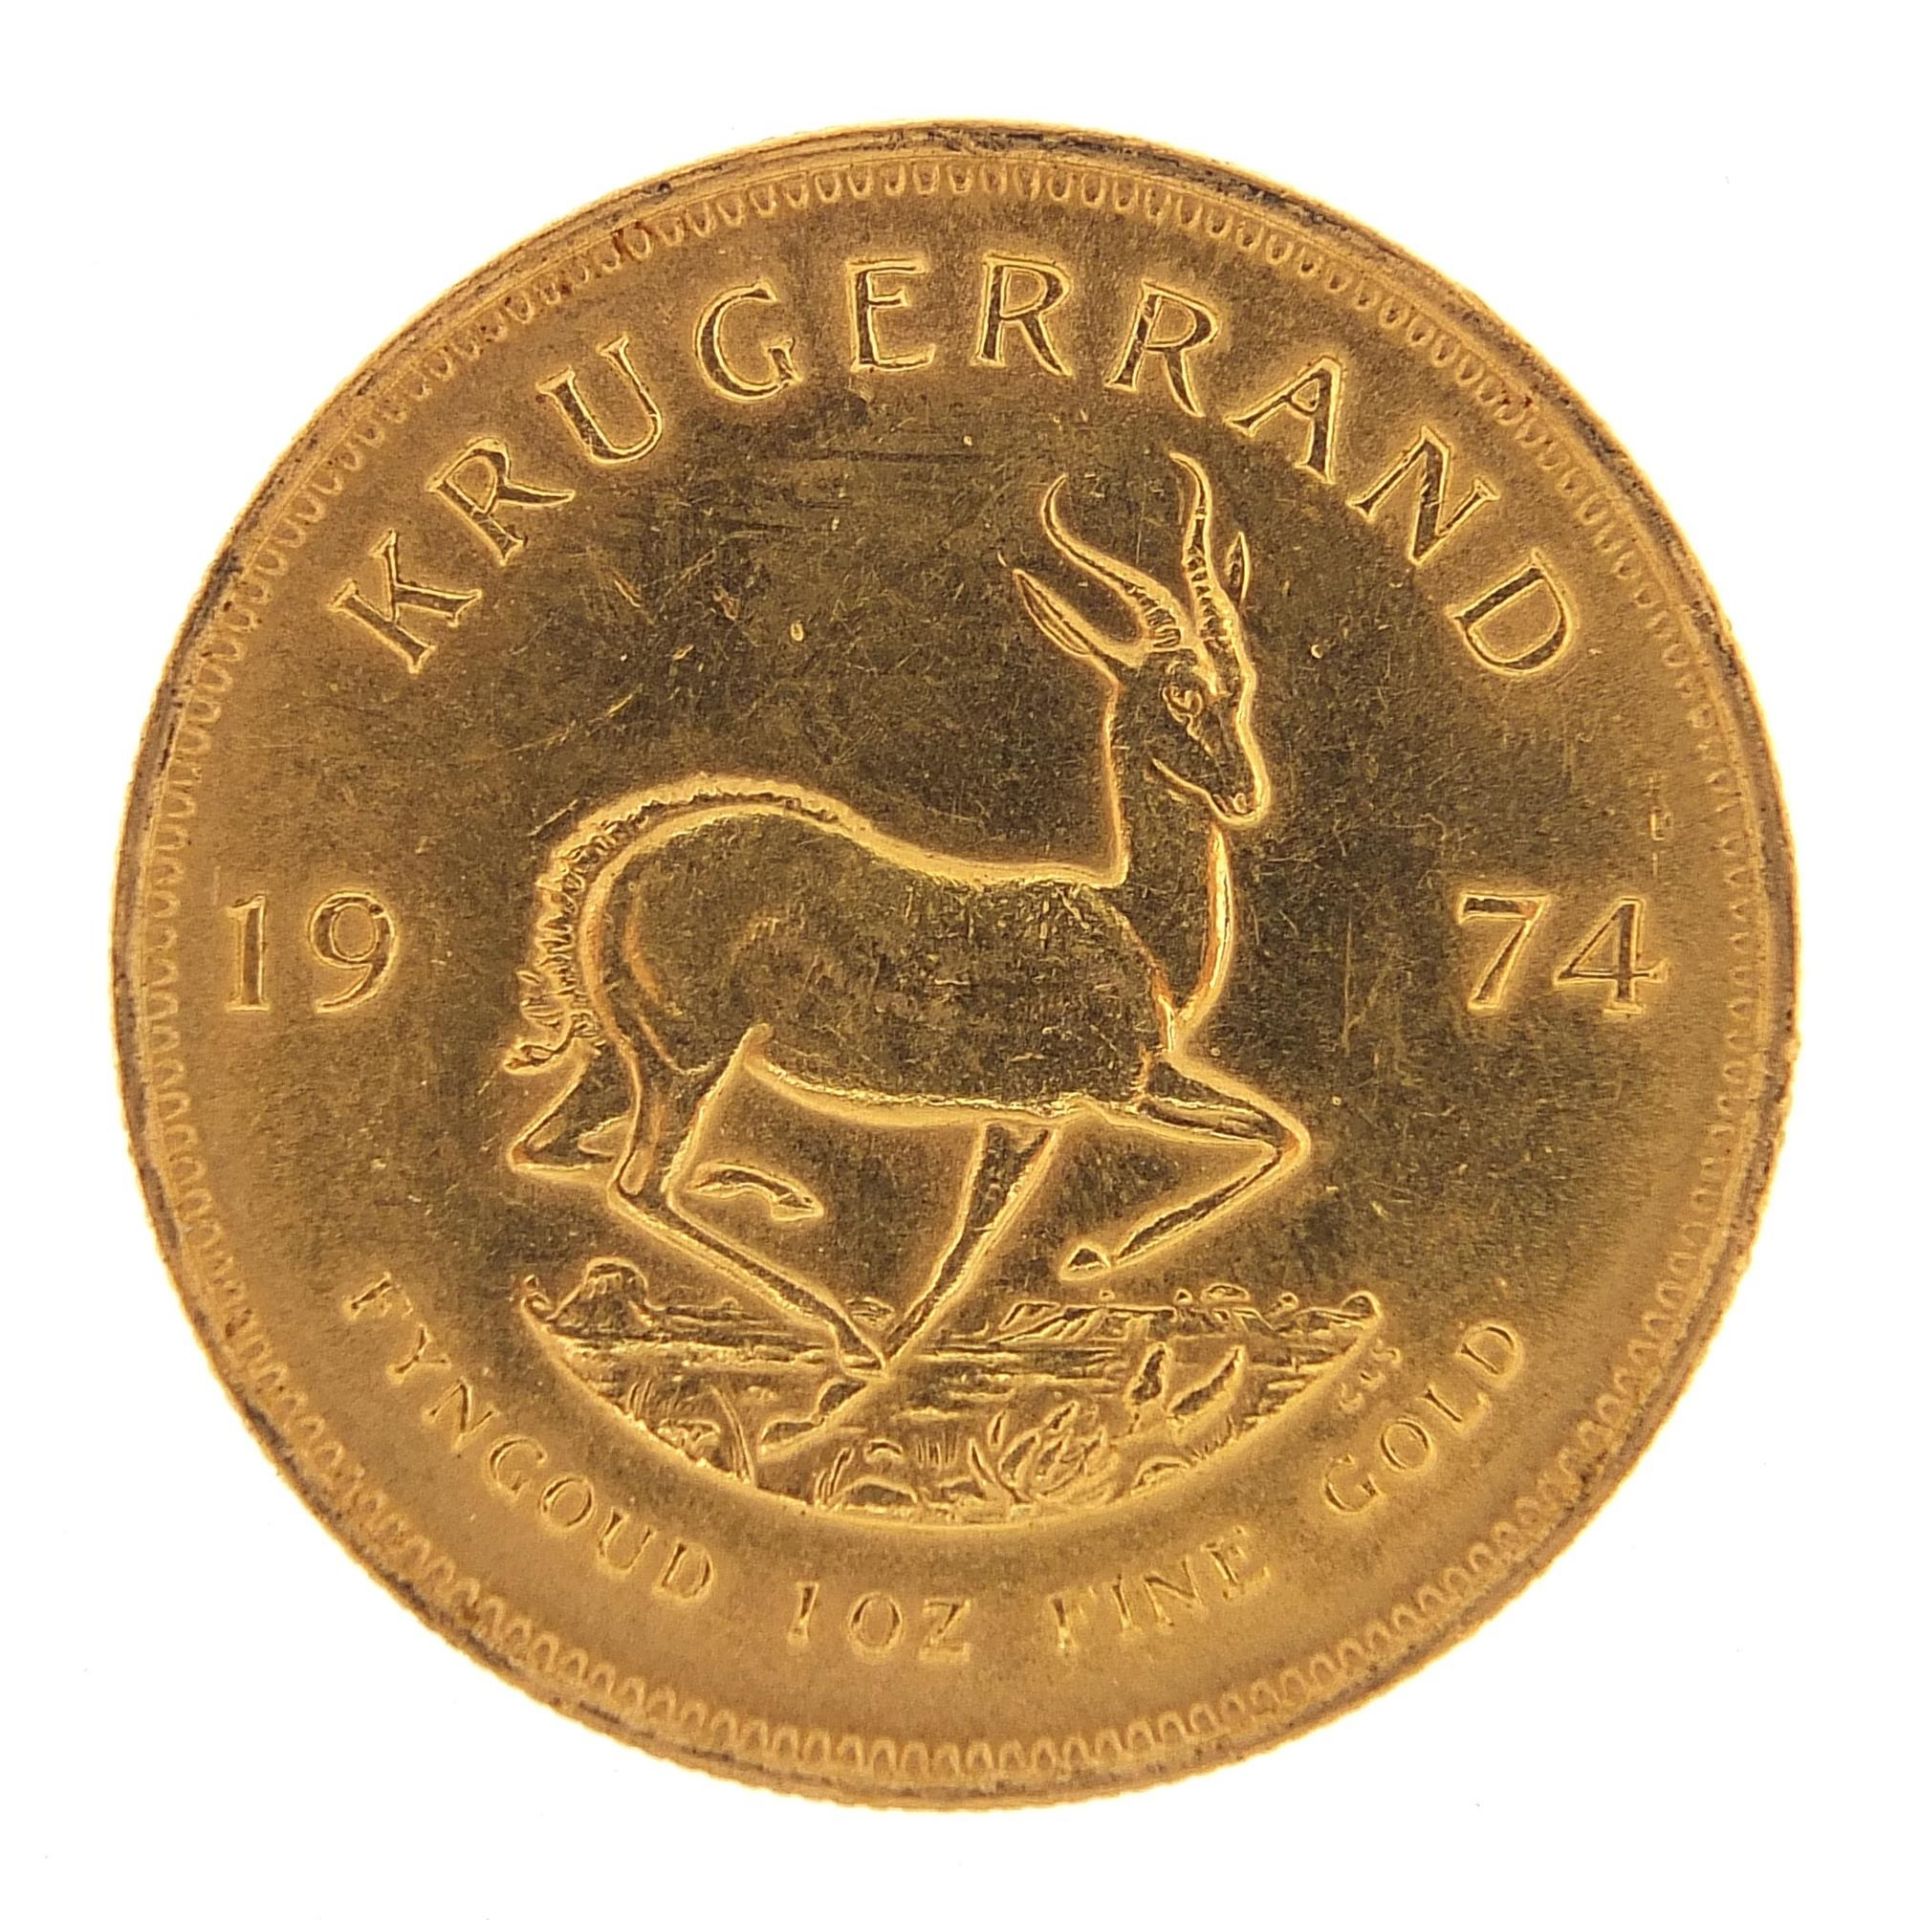 South African 1974 gold krugerrand - this lot is sold without buyer's premium